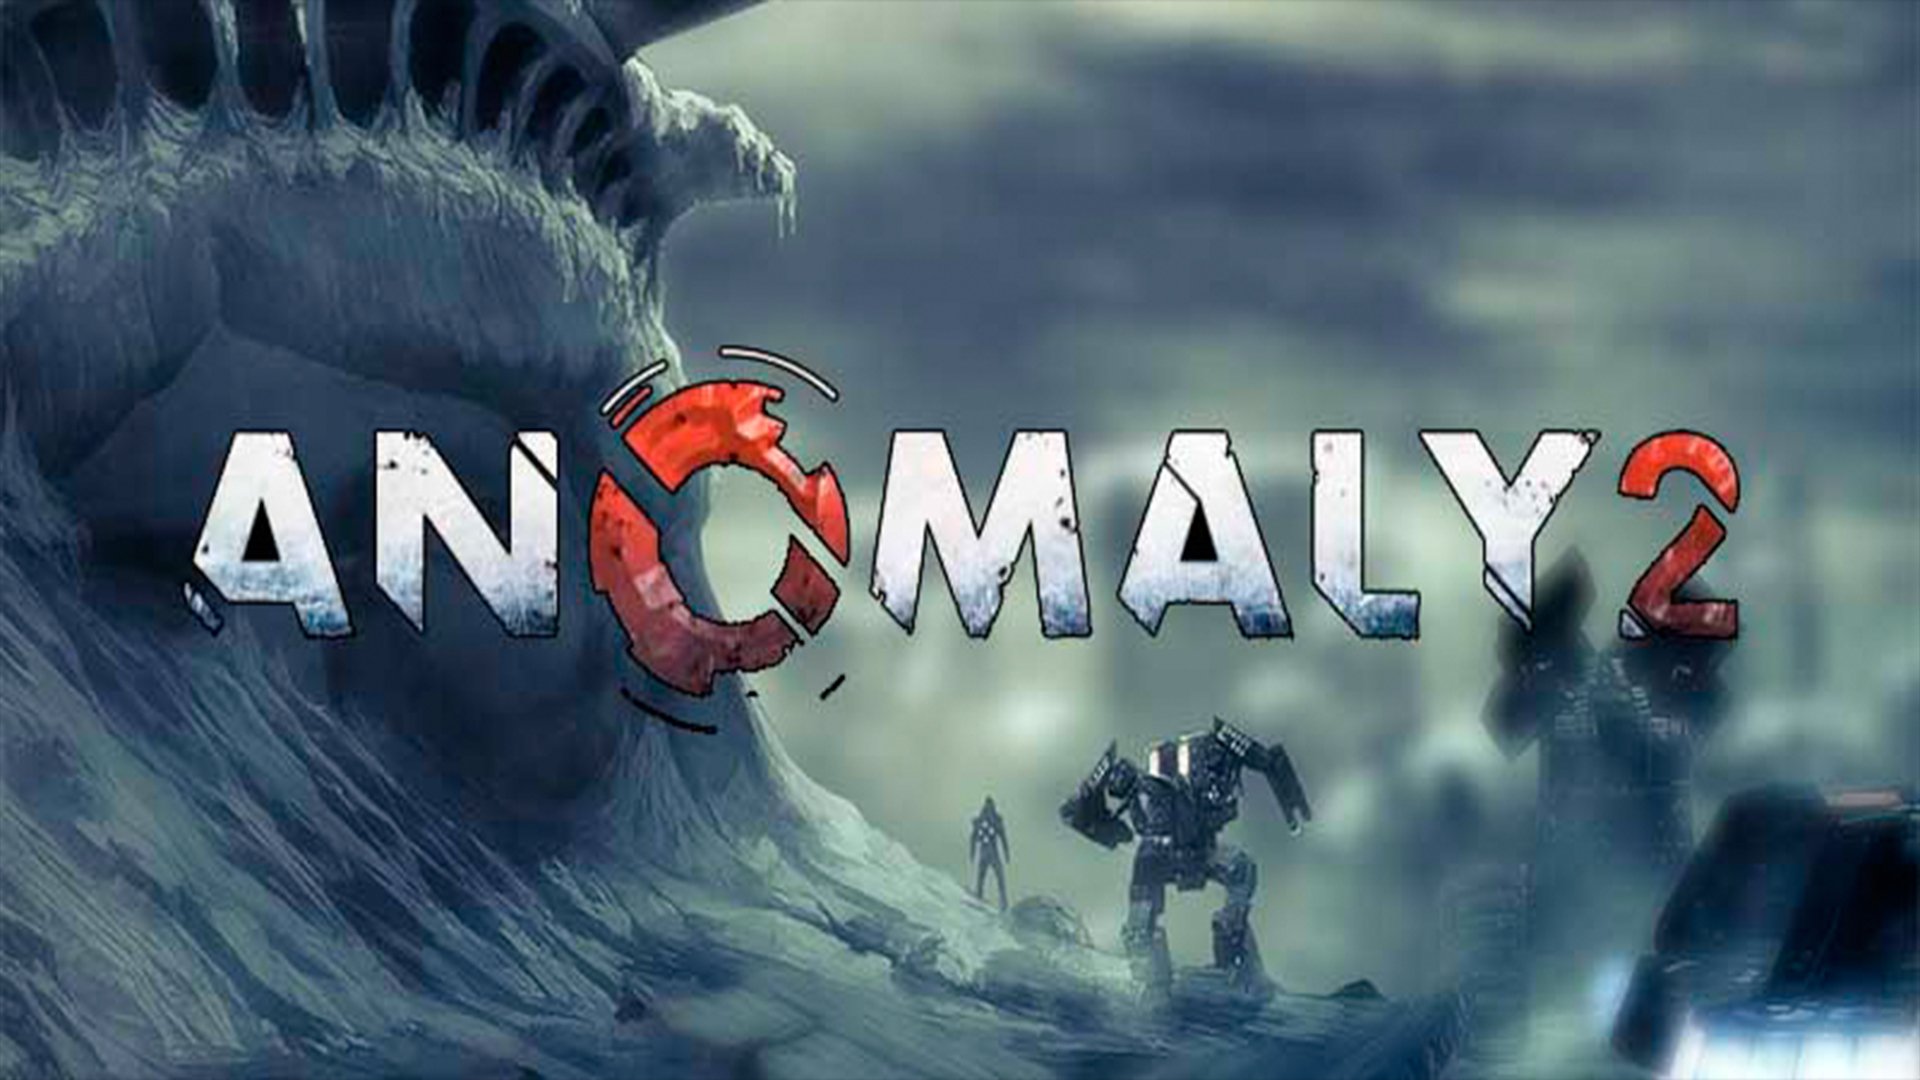 Anomaly 2 Hd Wallpaper Background Image 1920x1080 Id 530952 Images, Photos, Reviews